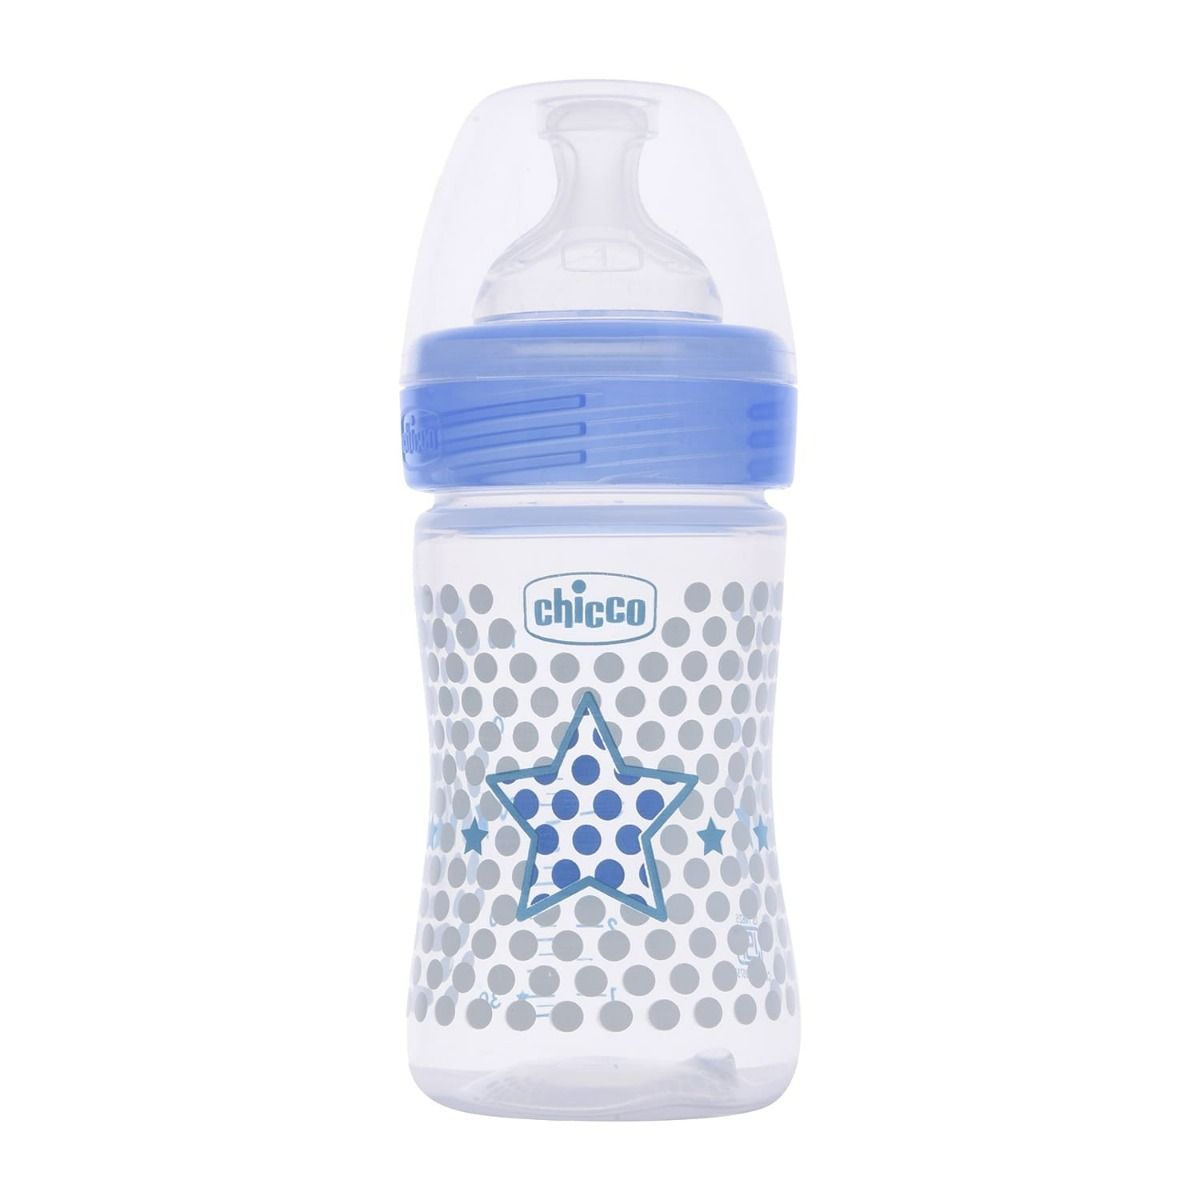 Chicco Well-Being Blue Feeding Bottle, 150 ml, Pack of 1 